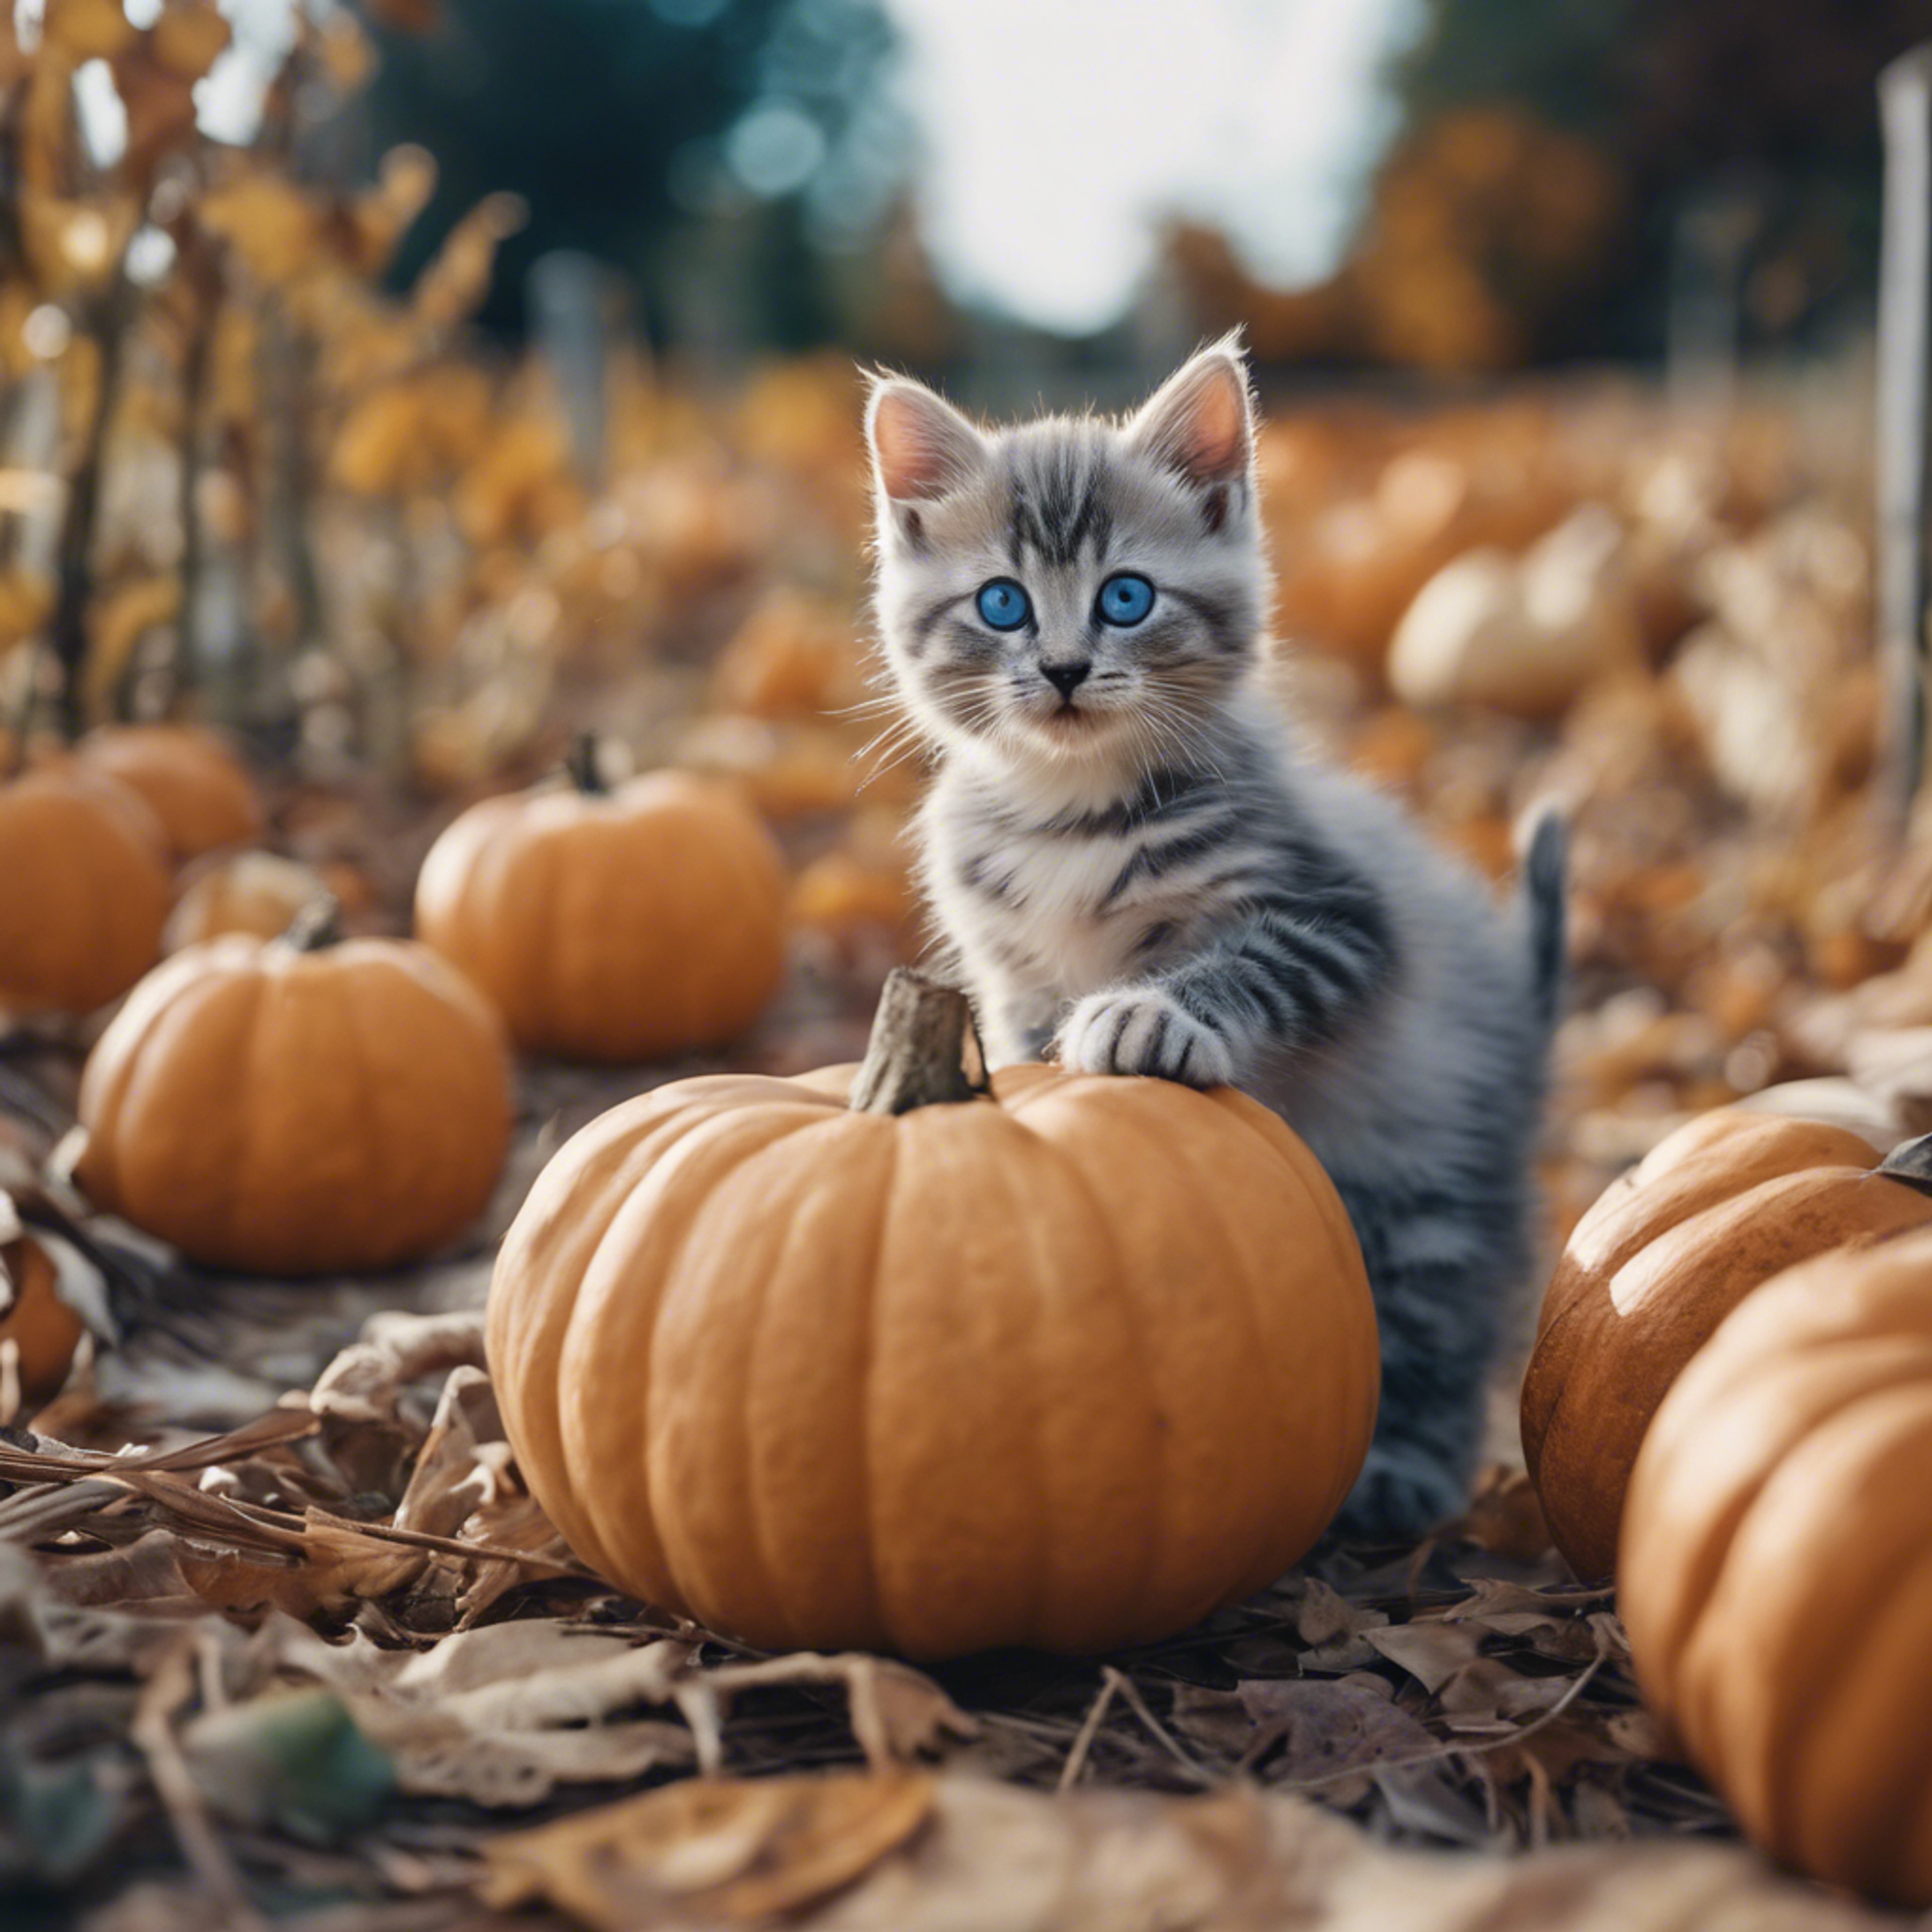 A small blue-eyed Cheetoh kitten exploring a pumpkin patch on an invitingly cool fall day. Sfondo[ee8fc80847a940e288a7]